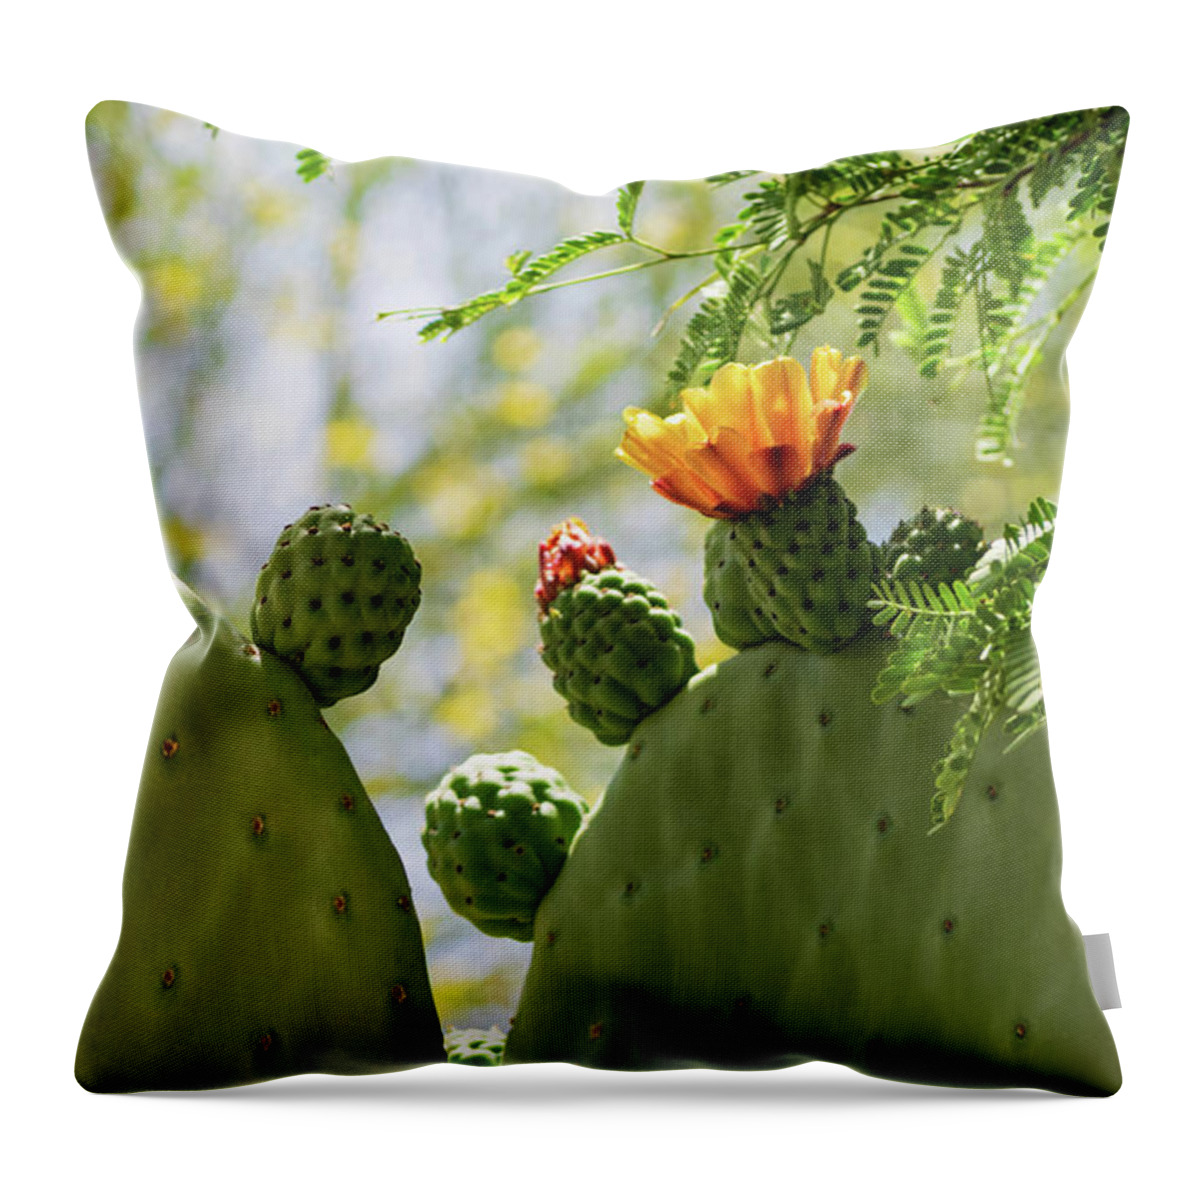 Cactus Throw Pillow featuring the photograph Spineless Prickly Pear Cactus Blooms by Marianne Campolongo